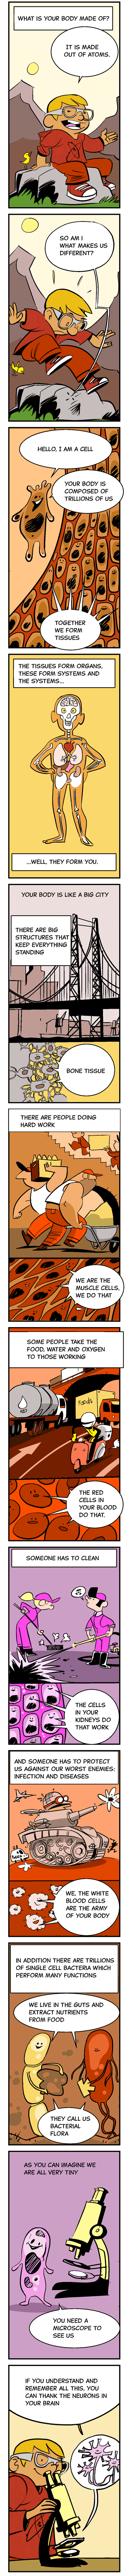 Your Cells